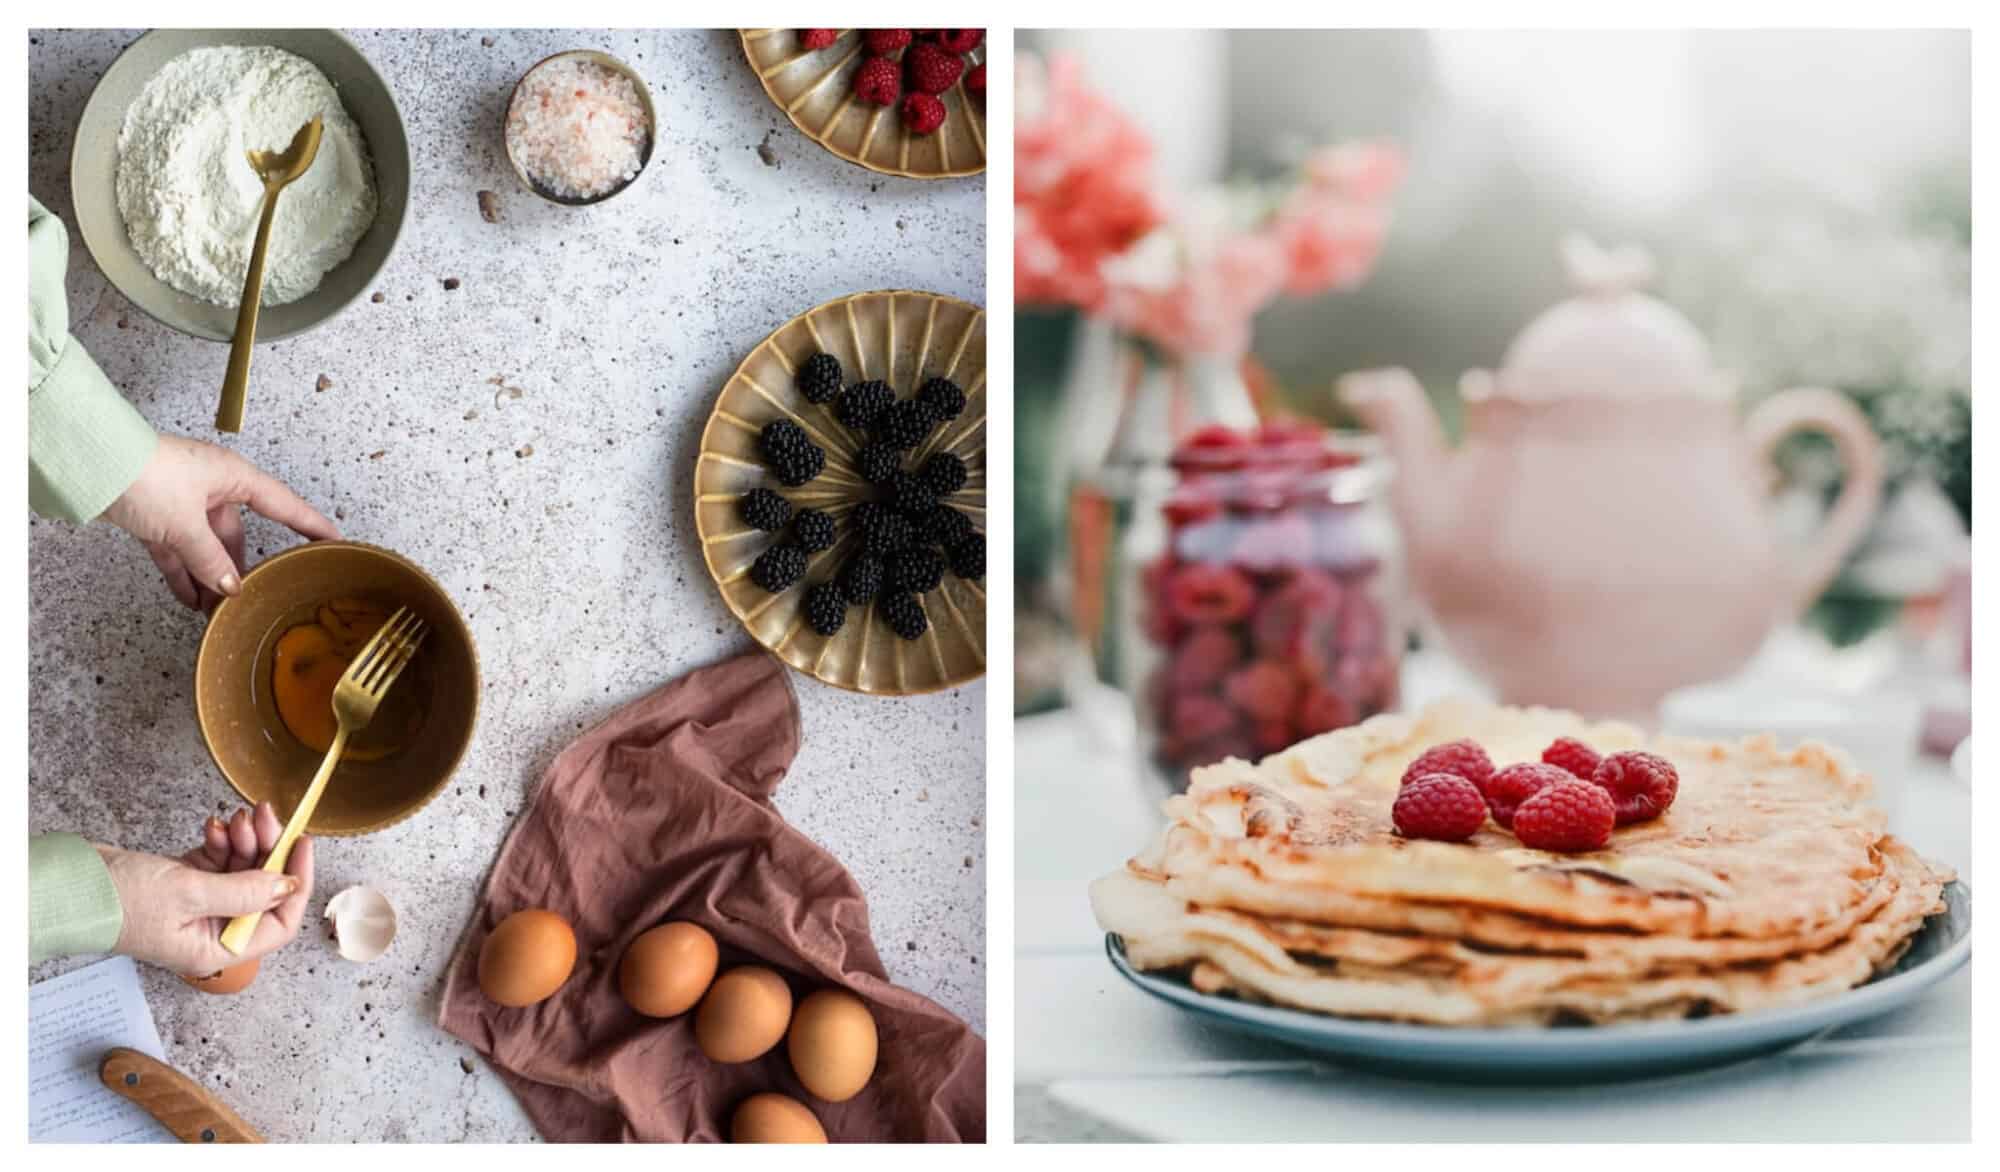 Left: A person whisking an egg in a bowl with other ingredients beside like flour, blueberries, salt, and raspberries. Left: A plate of crepes topped with 6 red raspberries.